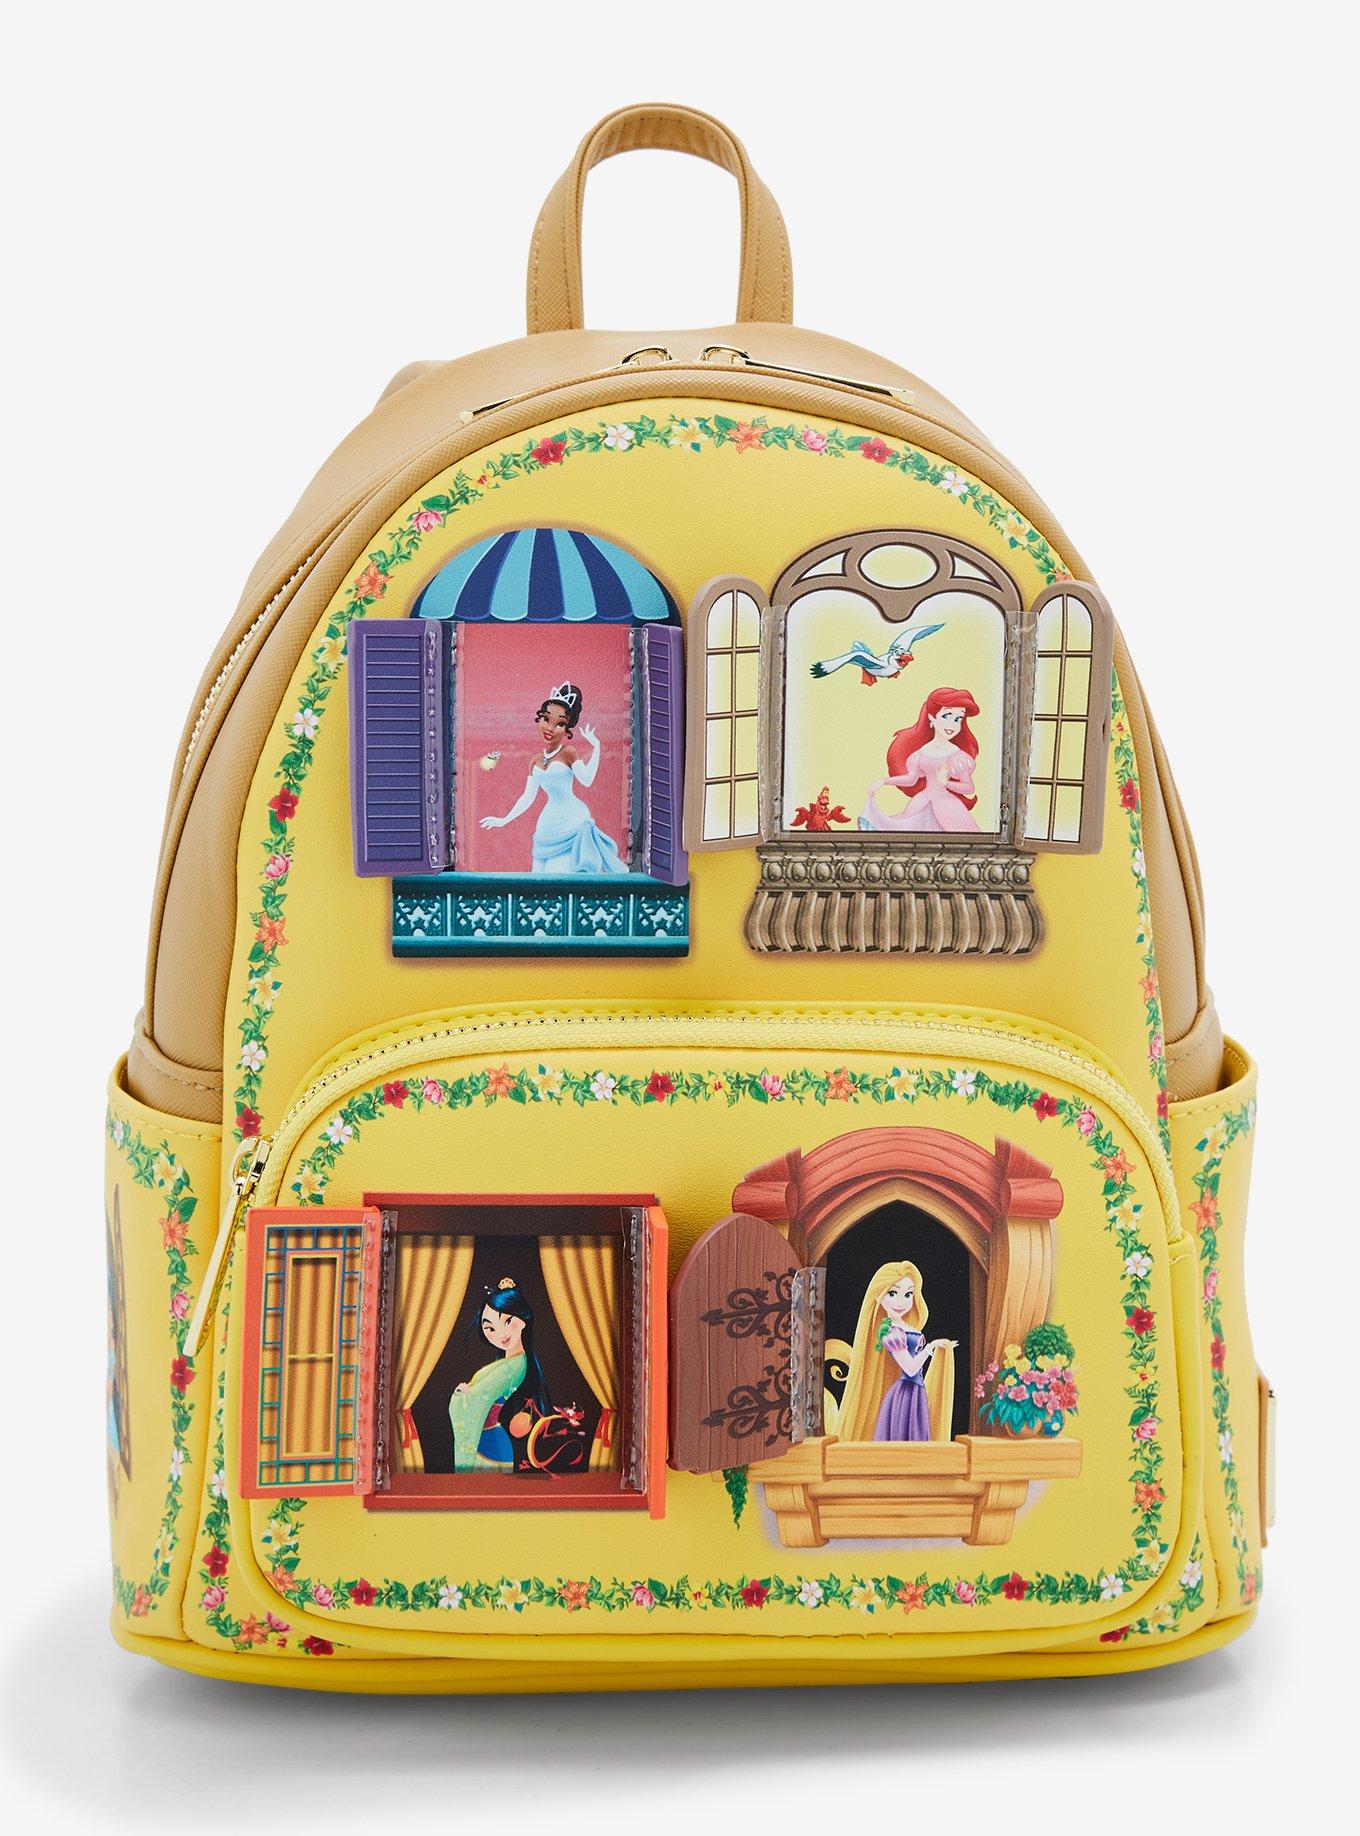 The ULTIMATE Sleeping Beauty Backpack Is For Sale On Boxlunch!